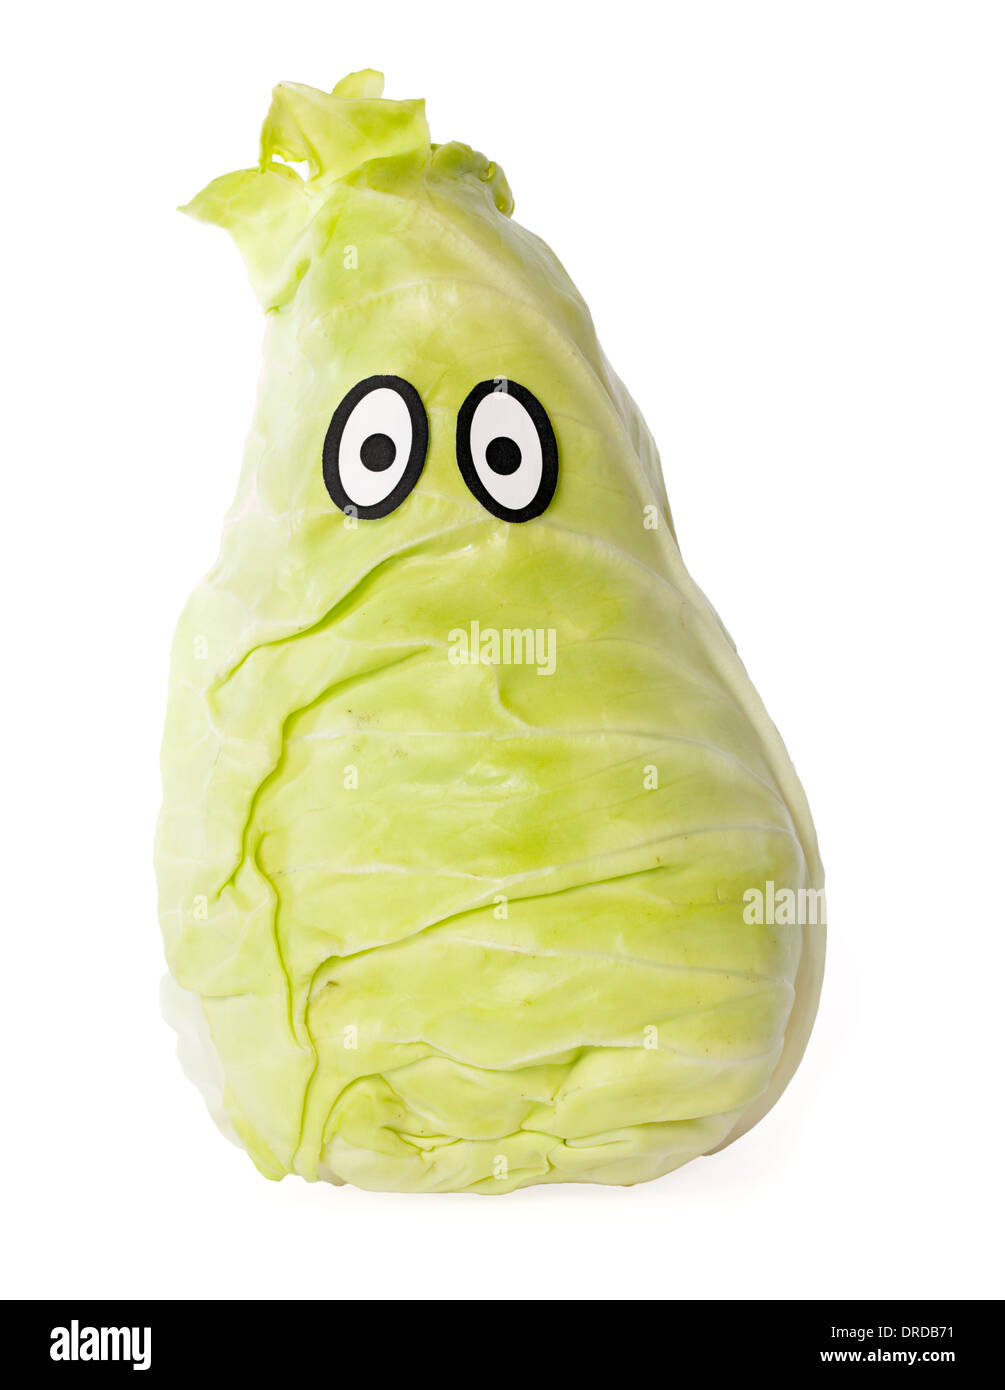 Pointed cabbage head with eyes and crest against white background Stock Photo